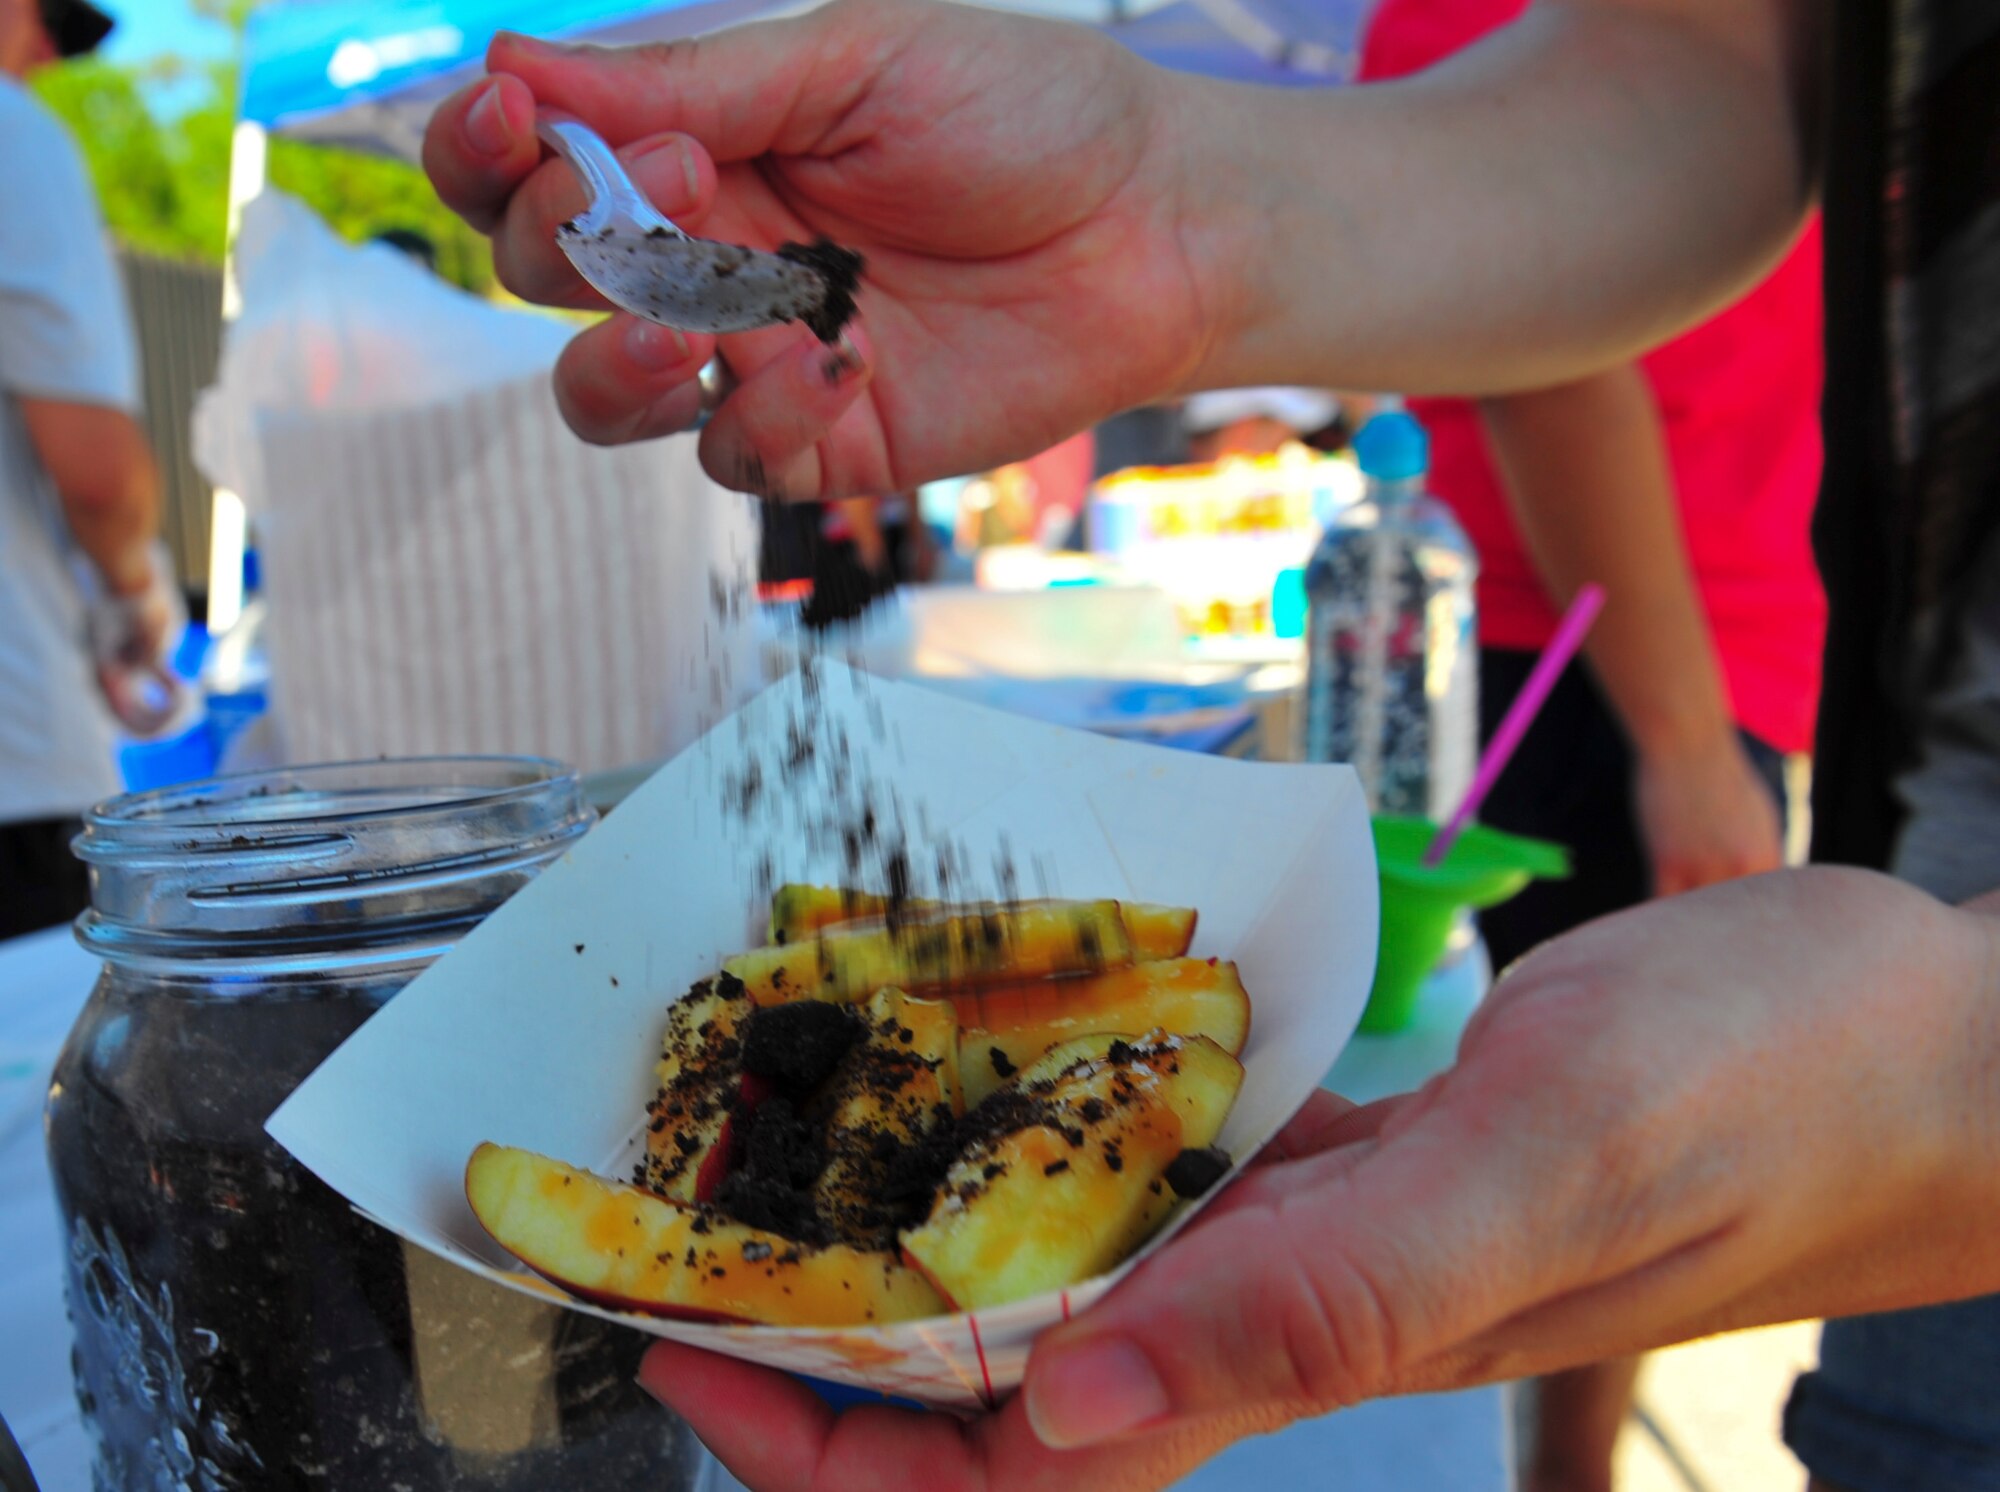 A customer sprinkles cookie crumbs on a caramel apple from the Focus 5/6 group booth at the Sound of Independence on Hurlburt Field, Fla., June 24, 2016. Various squadrons and organizations on base provided attractions, as well as food and drinks, to Airmen and their families during the celebration. (U.S. Air Force photo by Airman Dennis Spain)